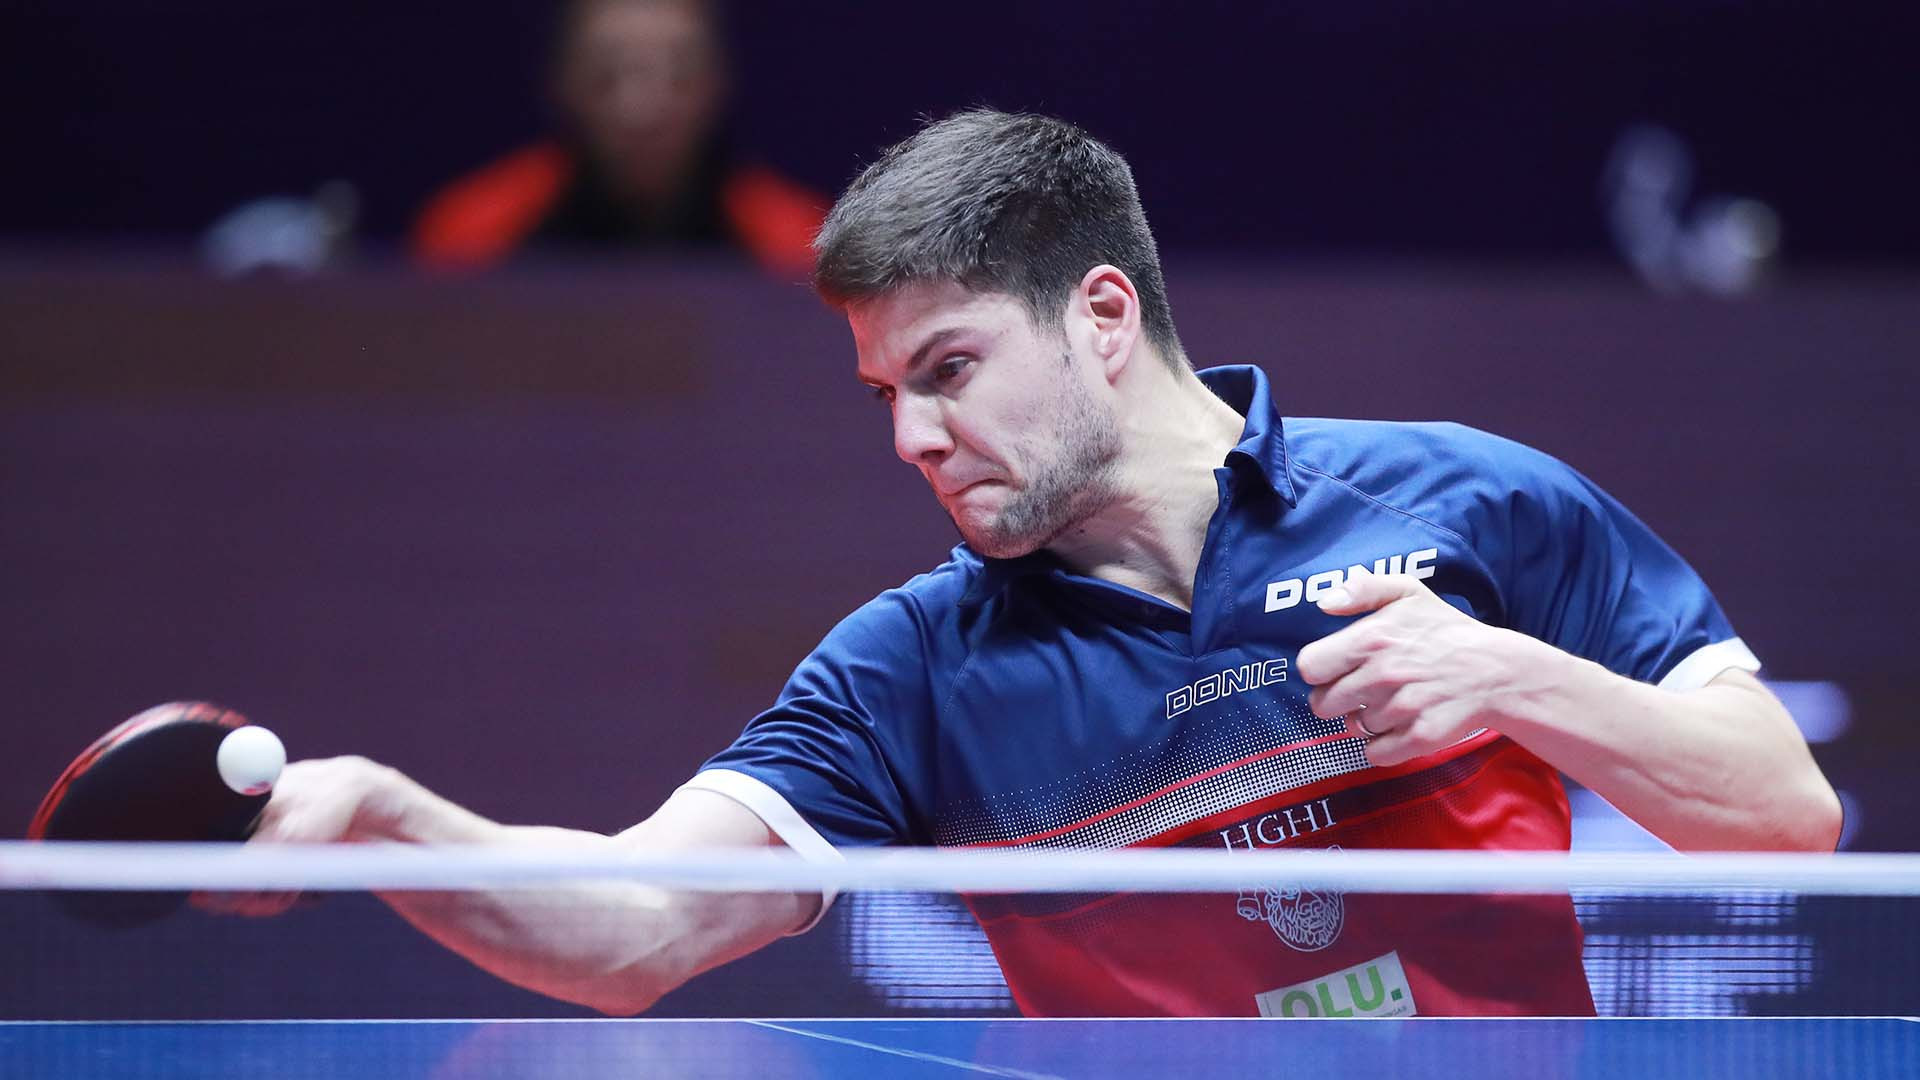 Top seed Dimitrij Ovtcharov of Germany came through both his matches today to book a place in the men’s singles gold medal match at the ITTF World Tour Grand Finals in Astana ©ITTF/Rémy Gros